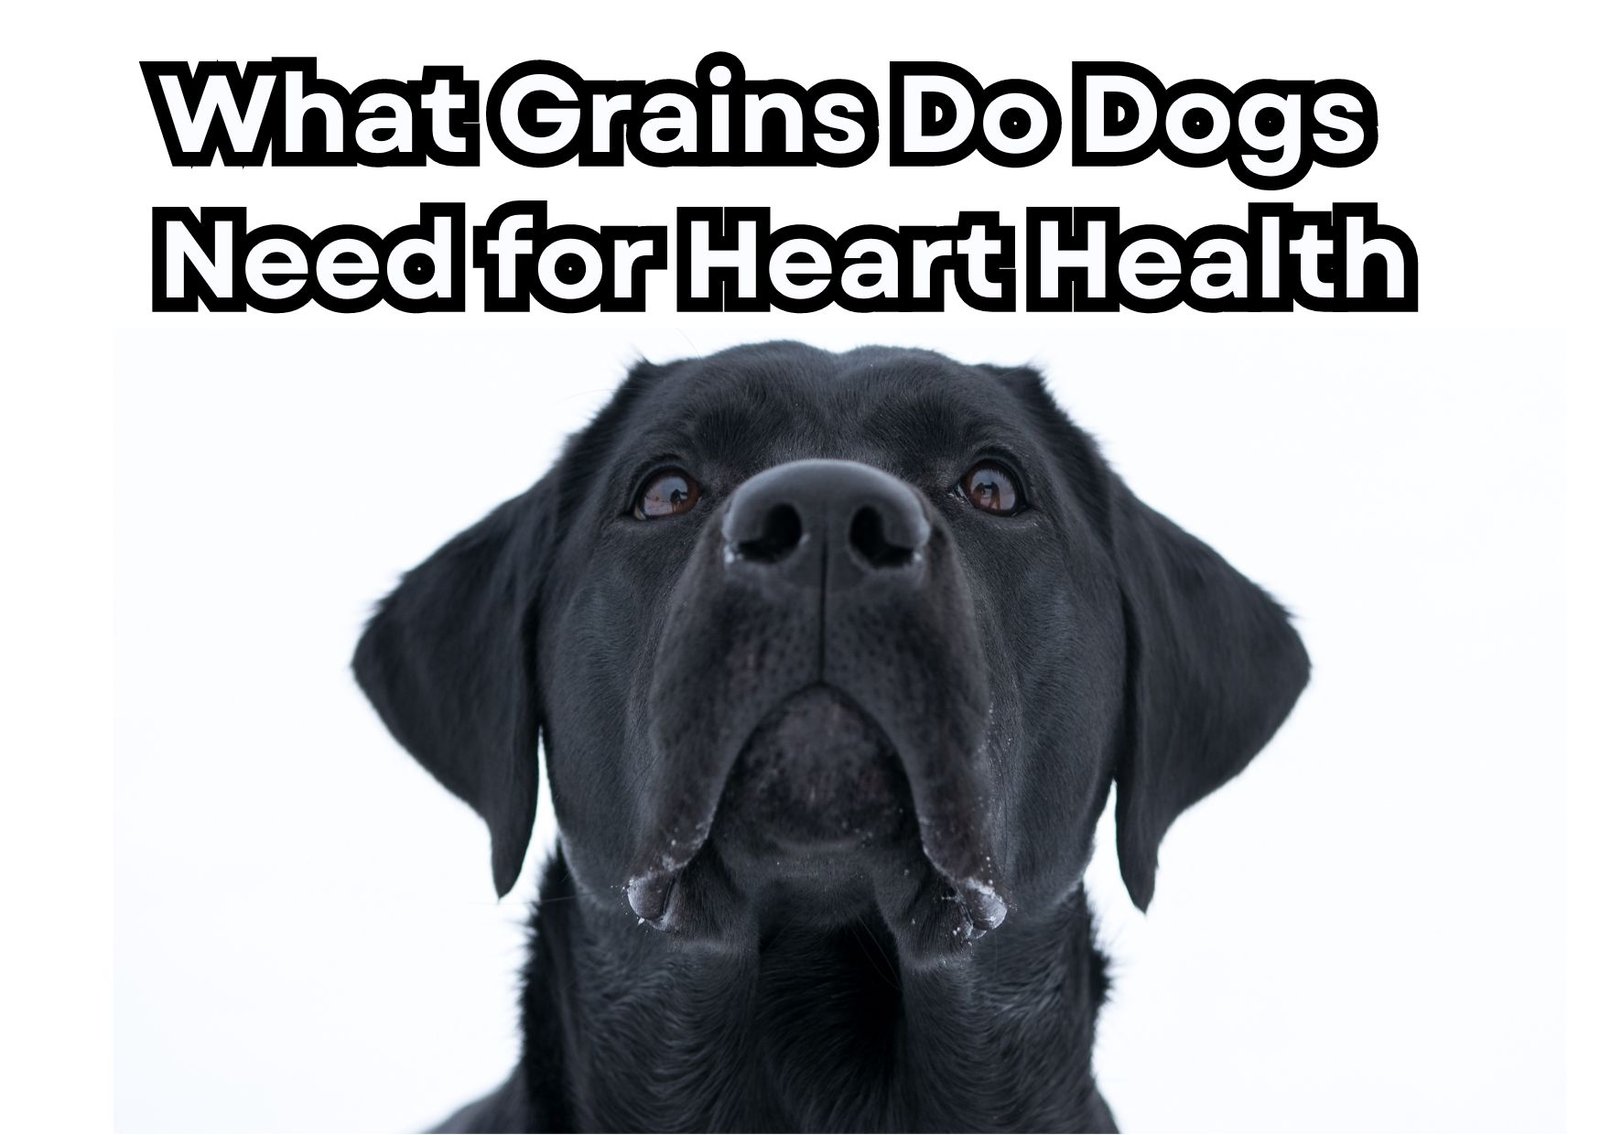 What Grains Do Dogs Need for Heart Health